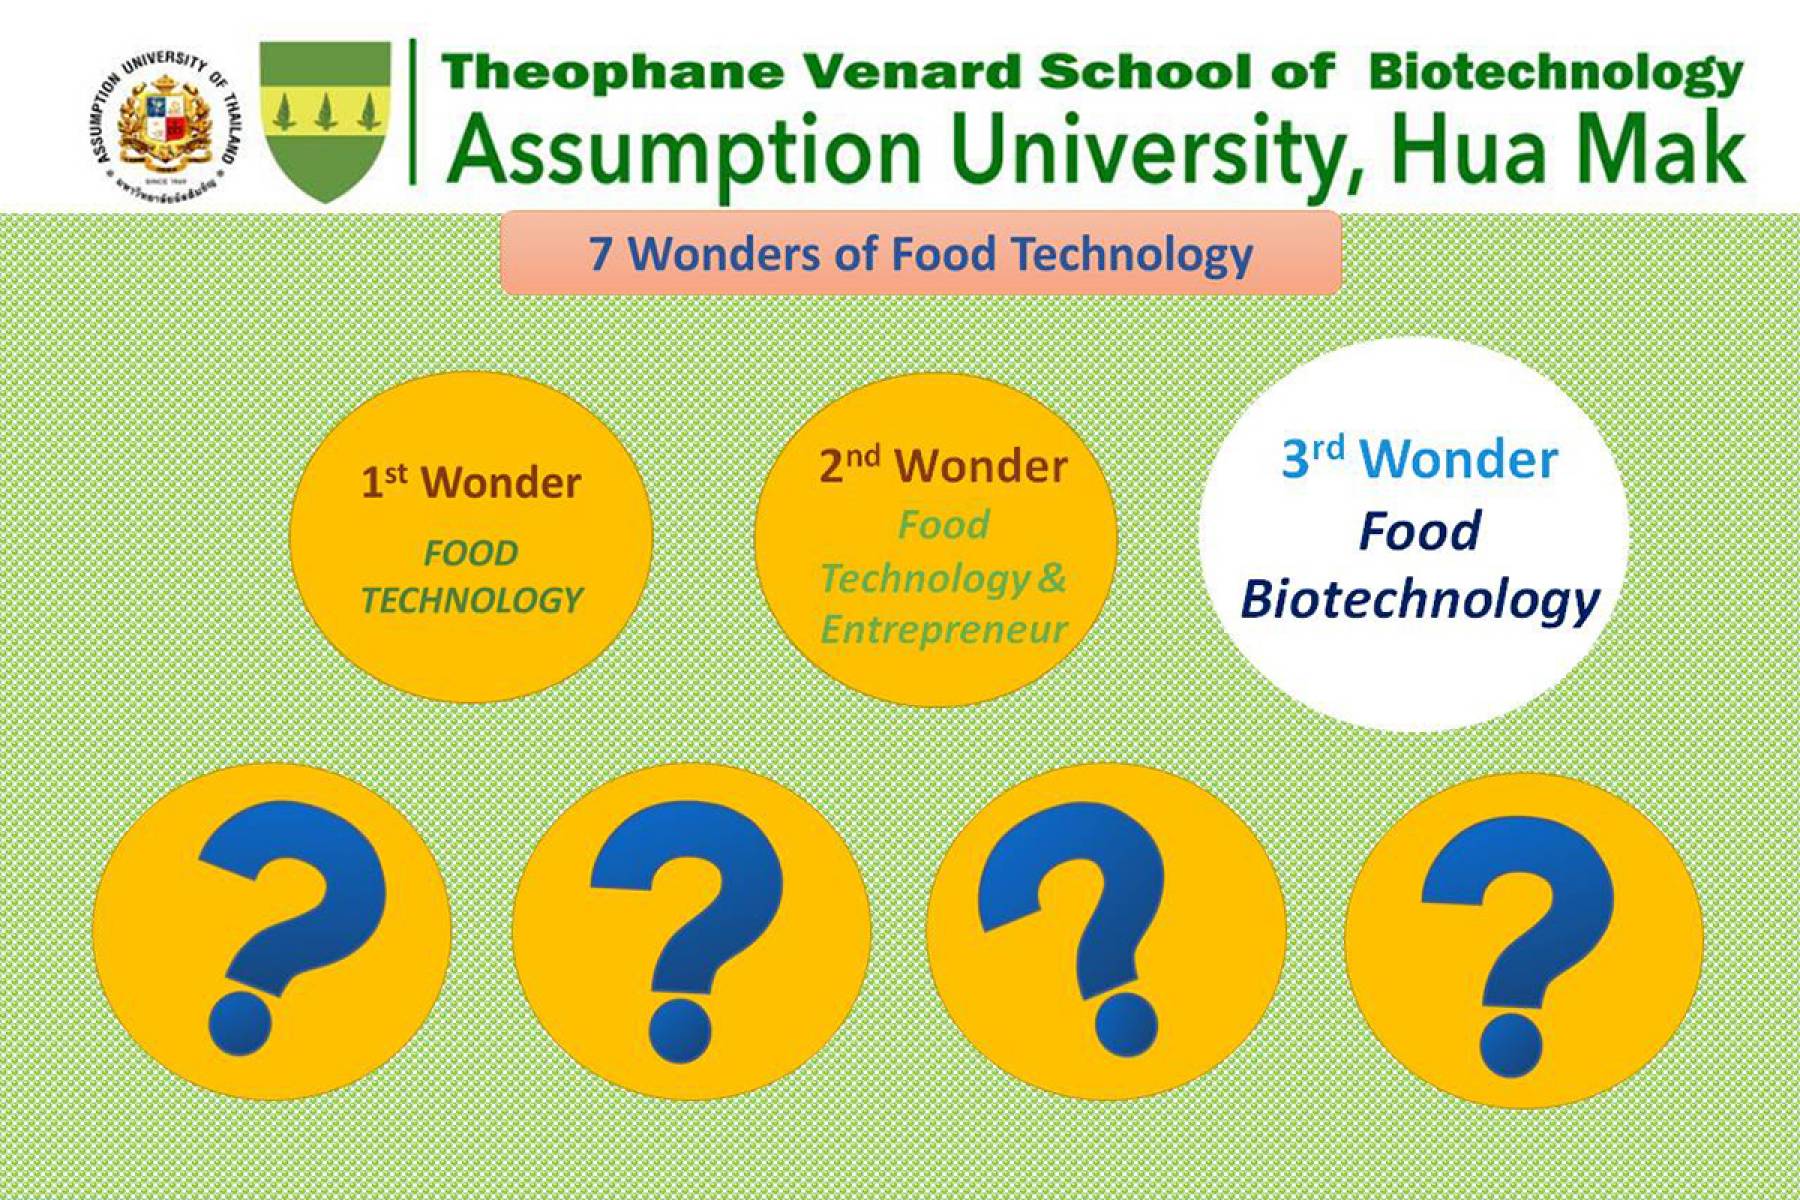 3rd Wonder: Food Biotechnology #Future Growth with Food Biotechnology